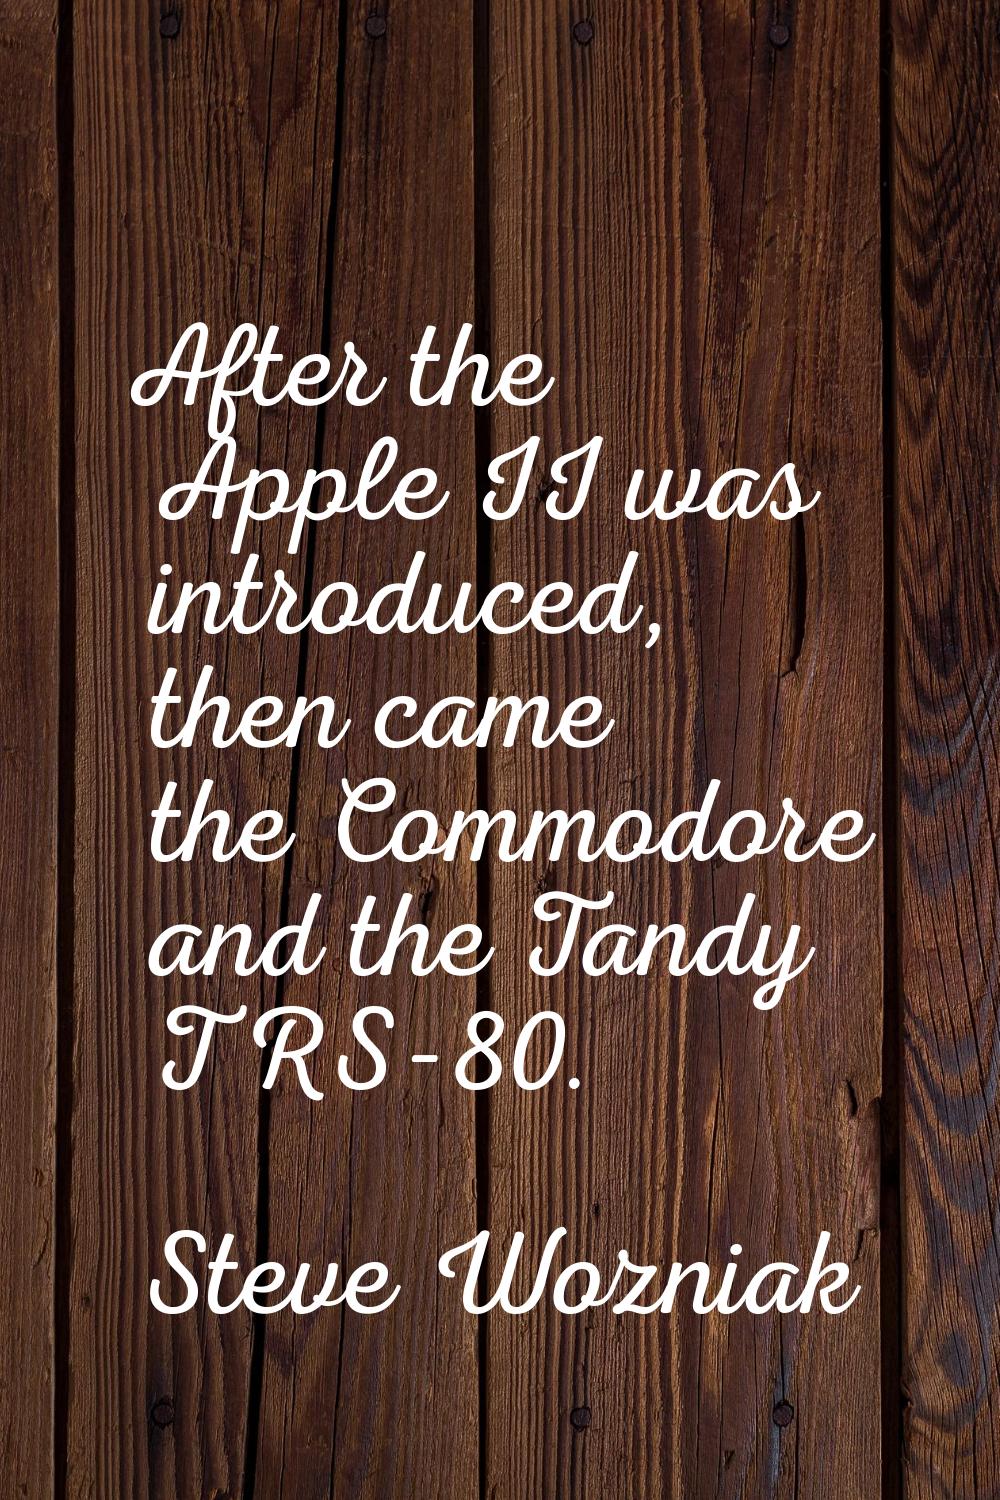 After the Apple II was introduced, then came the Commodore and the Tandy TRS-80.